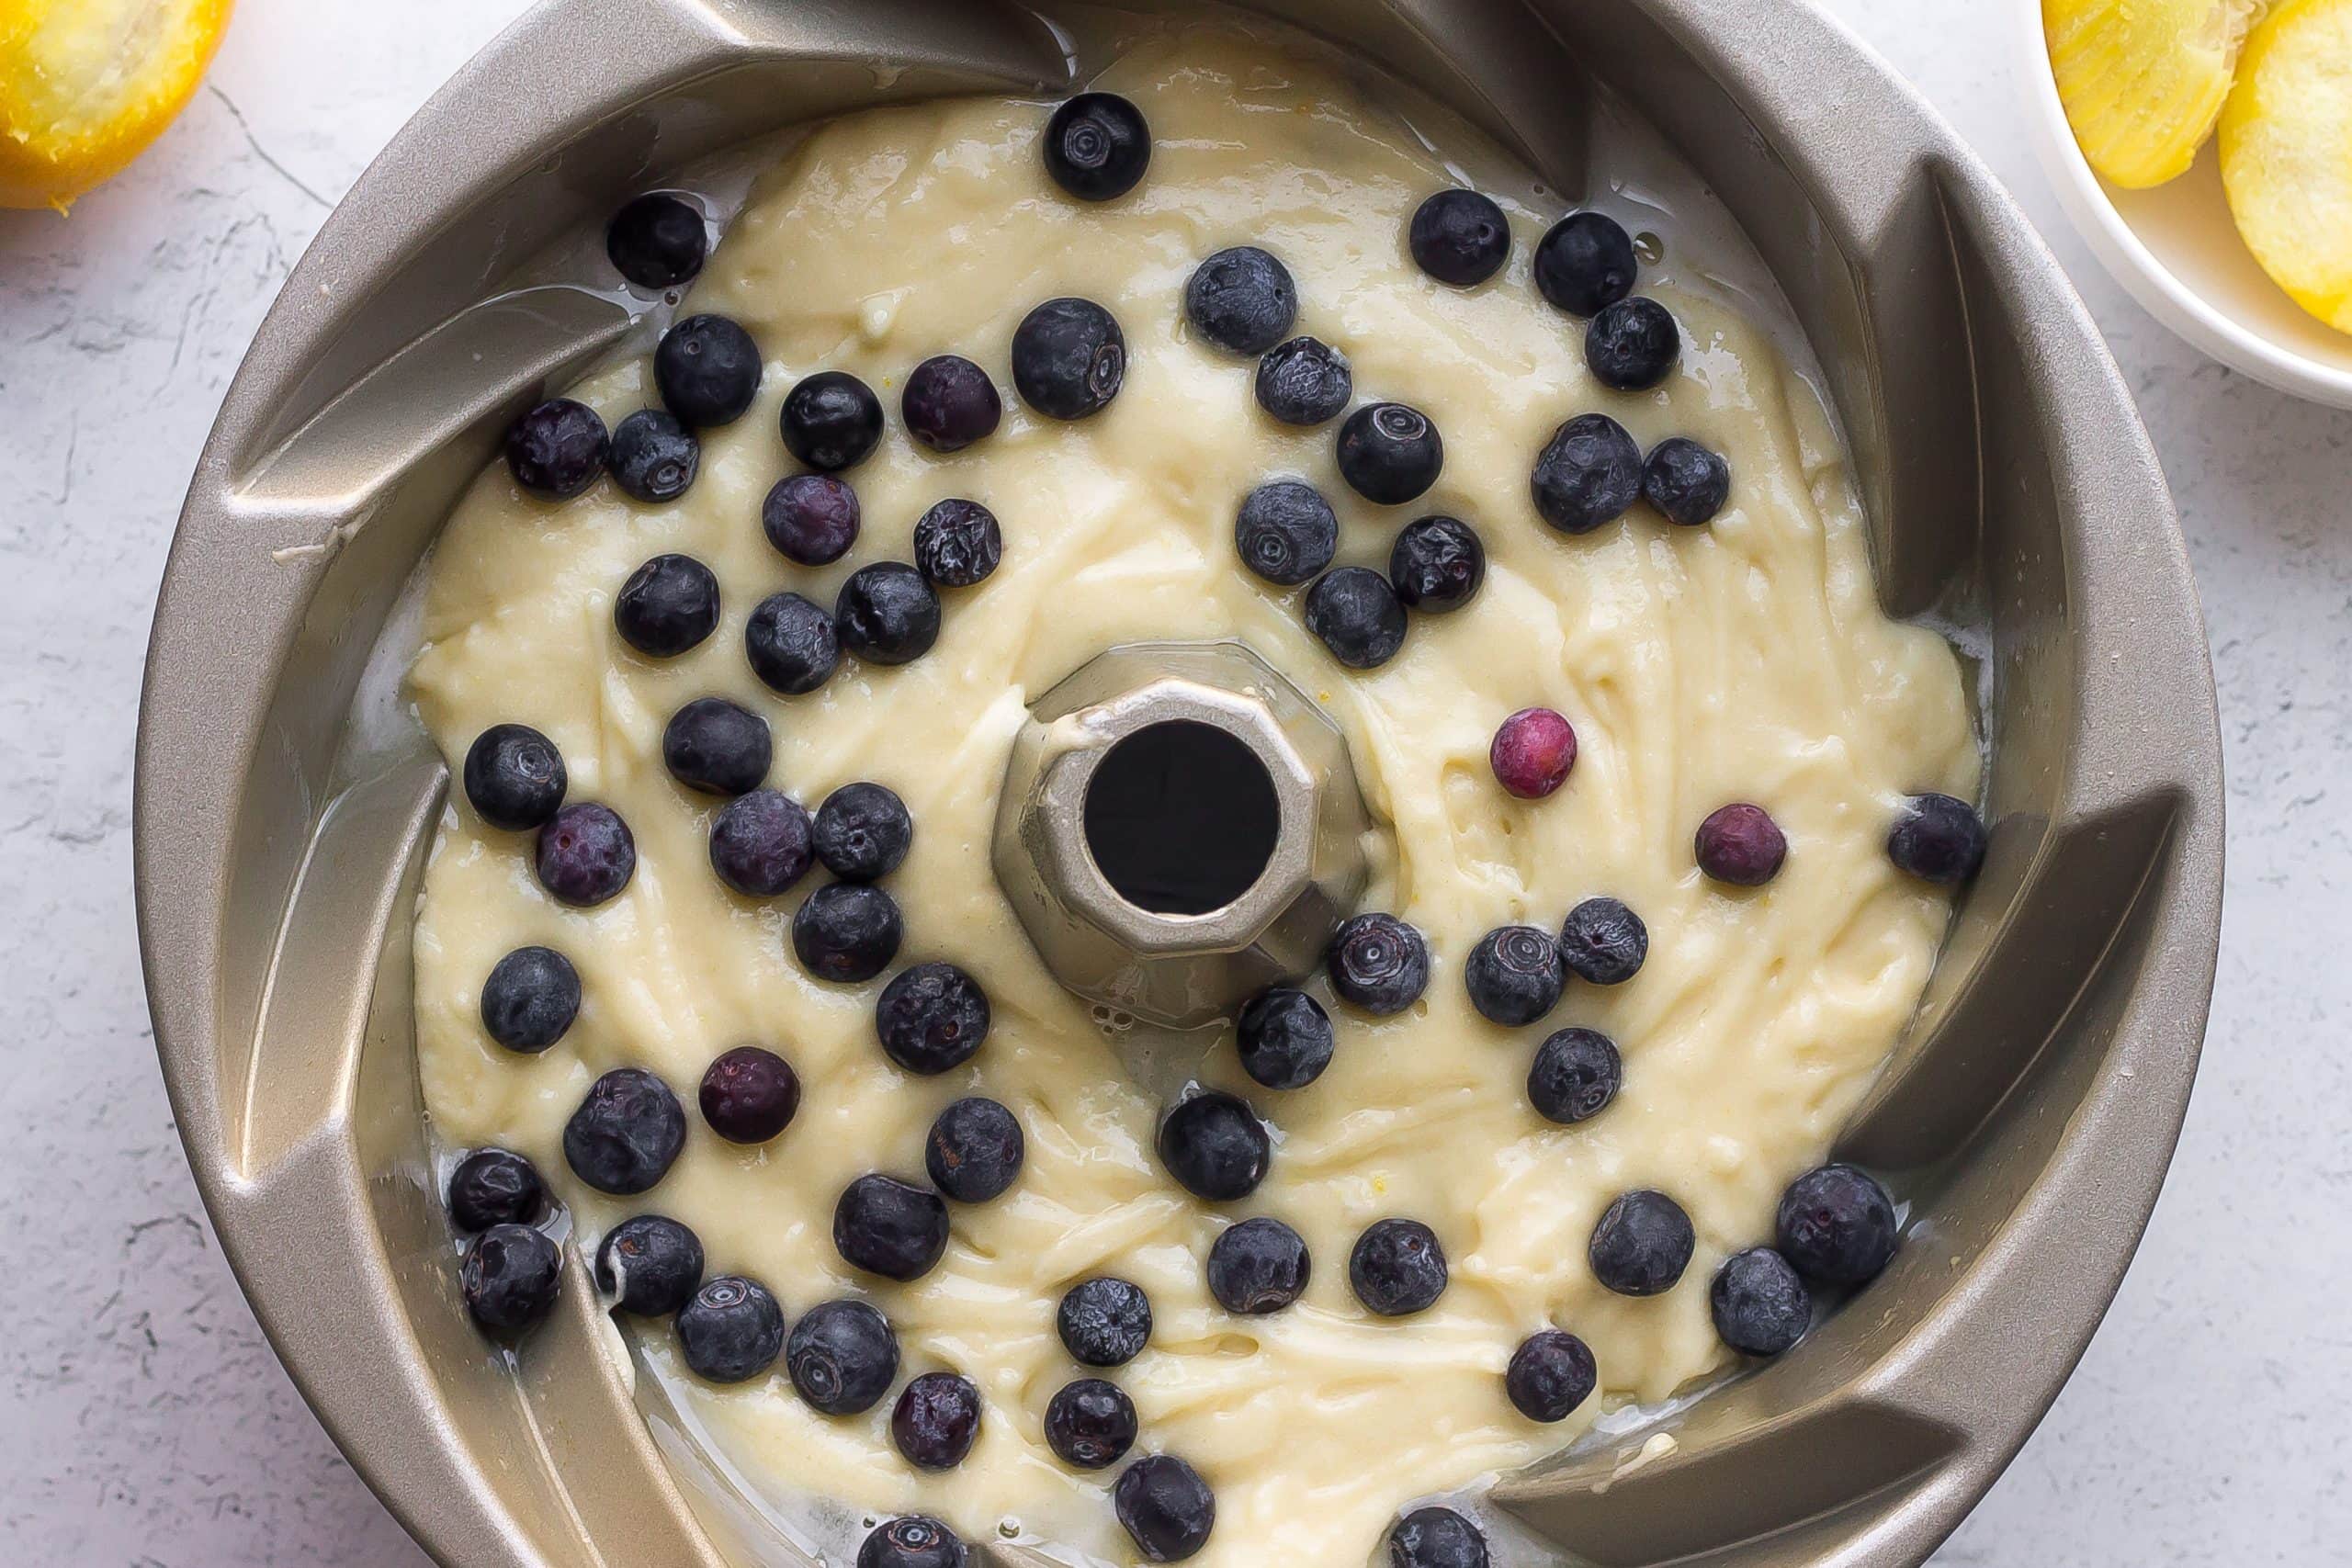 lemon cake batter in a bundt pan with blueberries on top